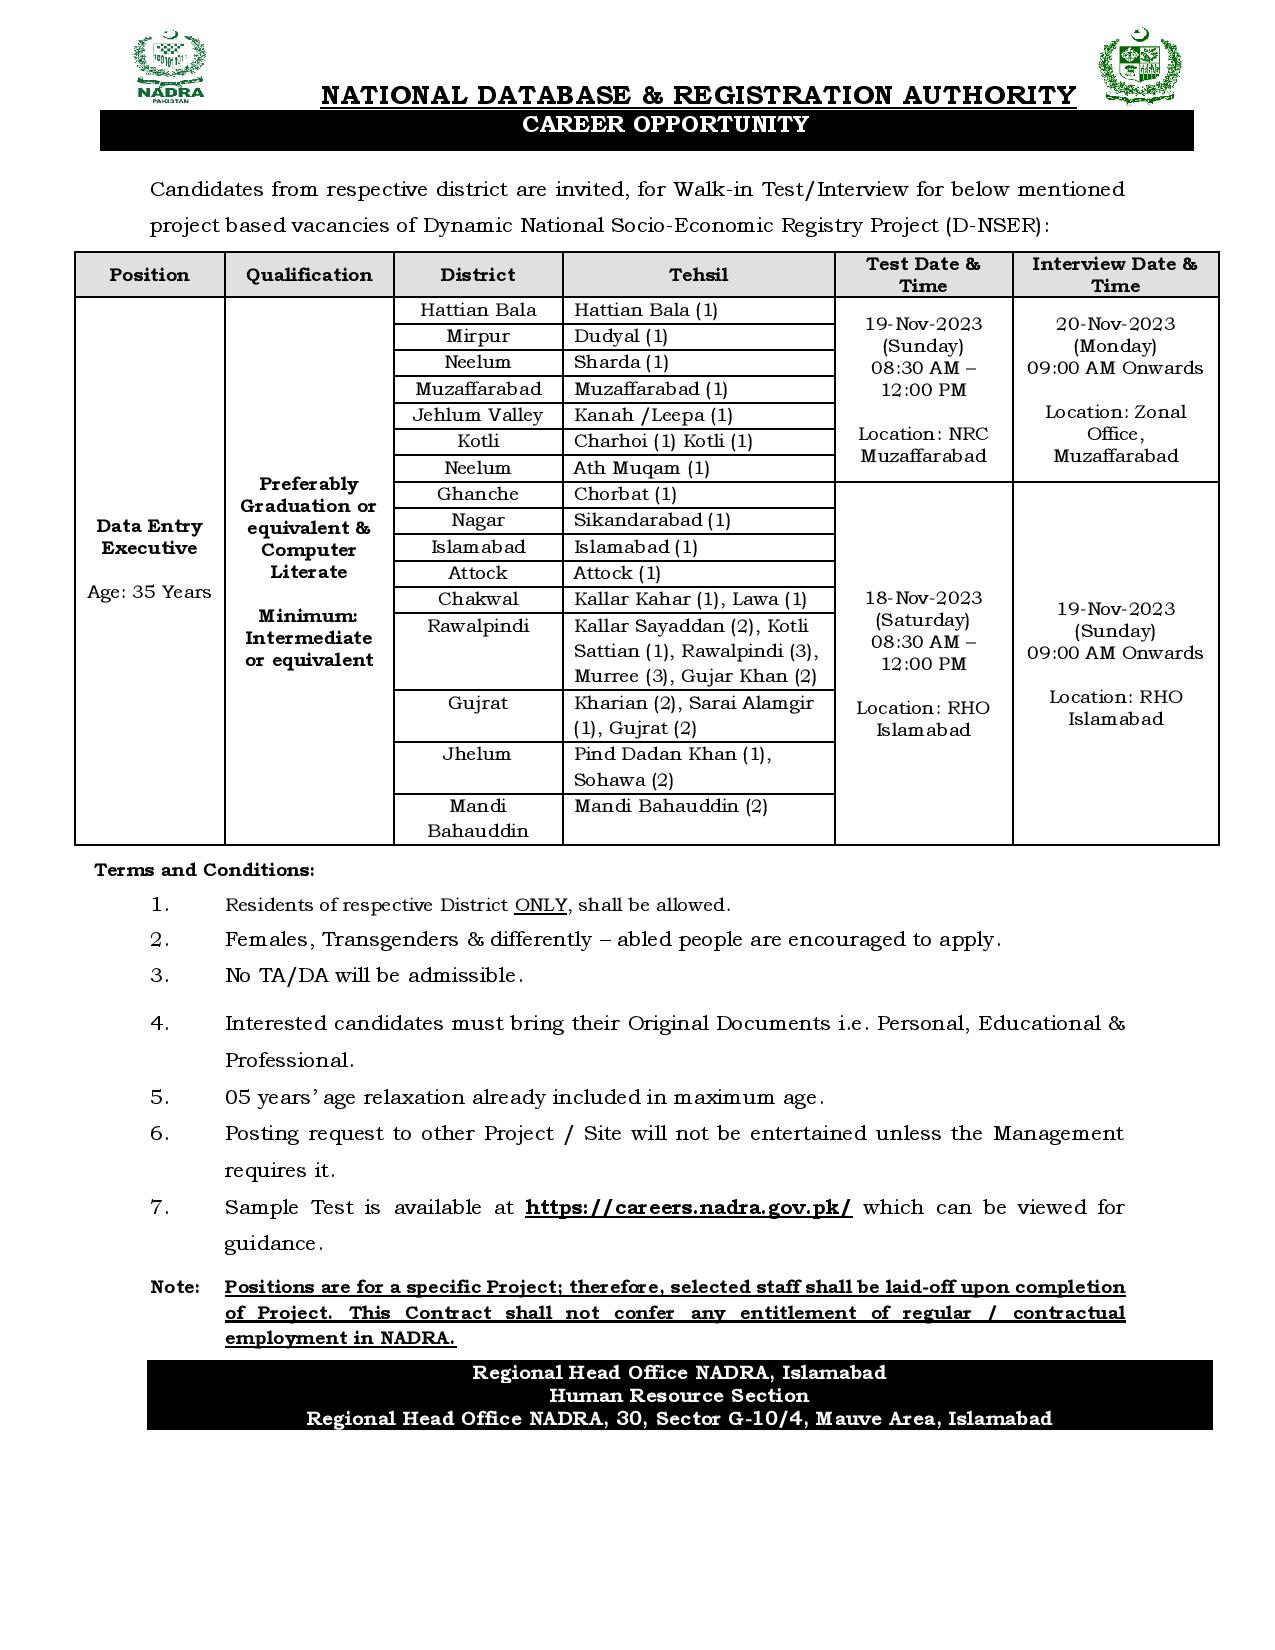 Advertisement For NADRA National Database and Registration Authority Jobs 2023